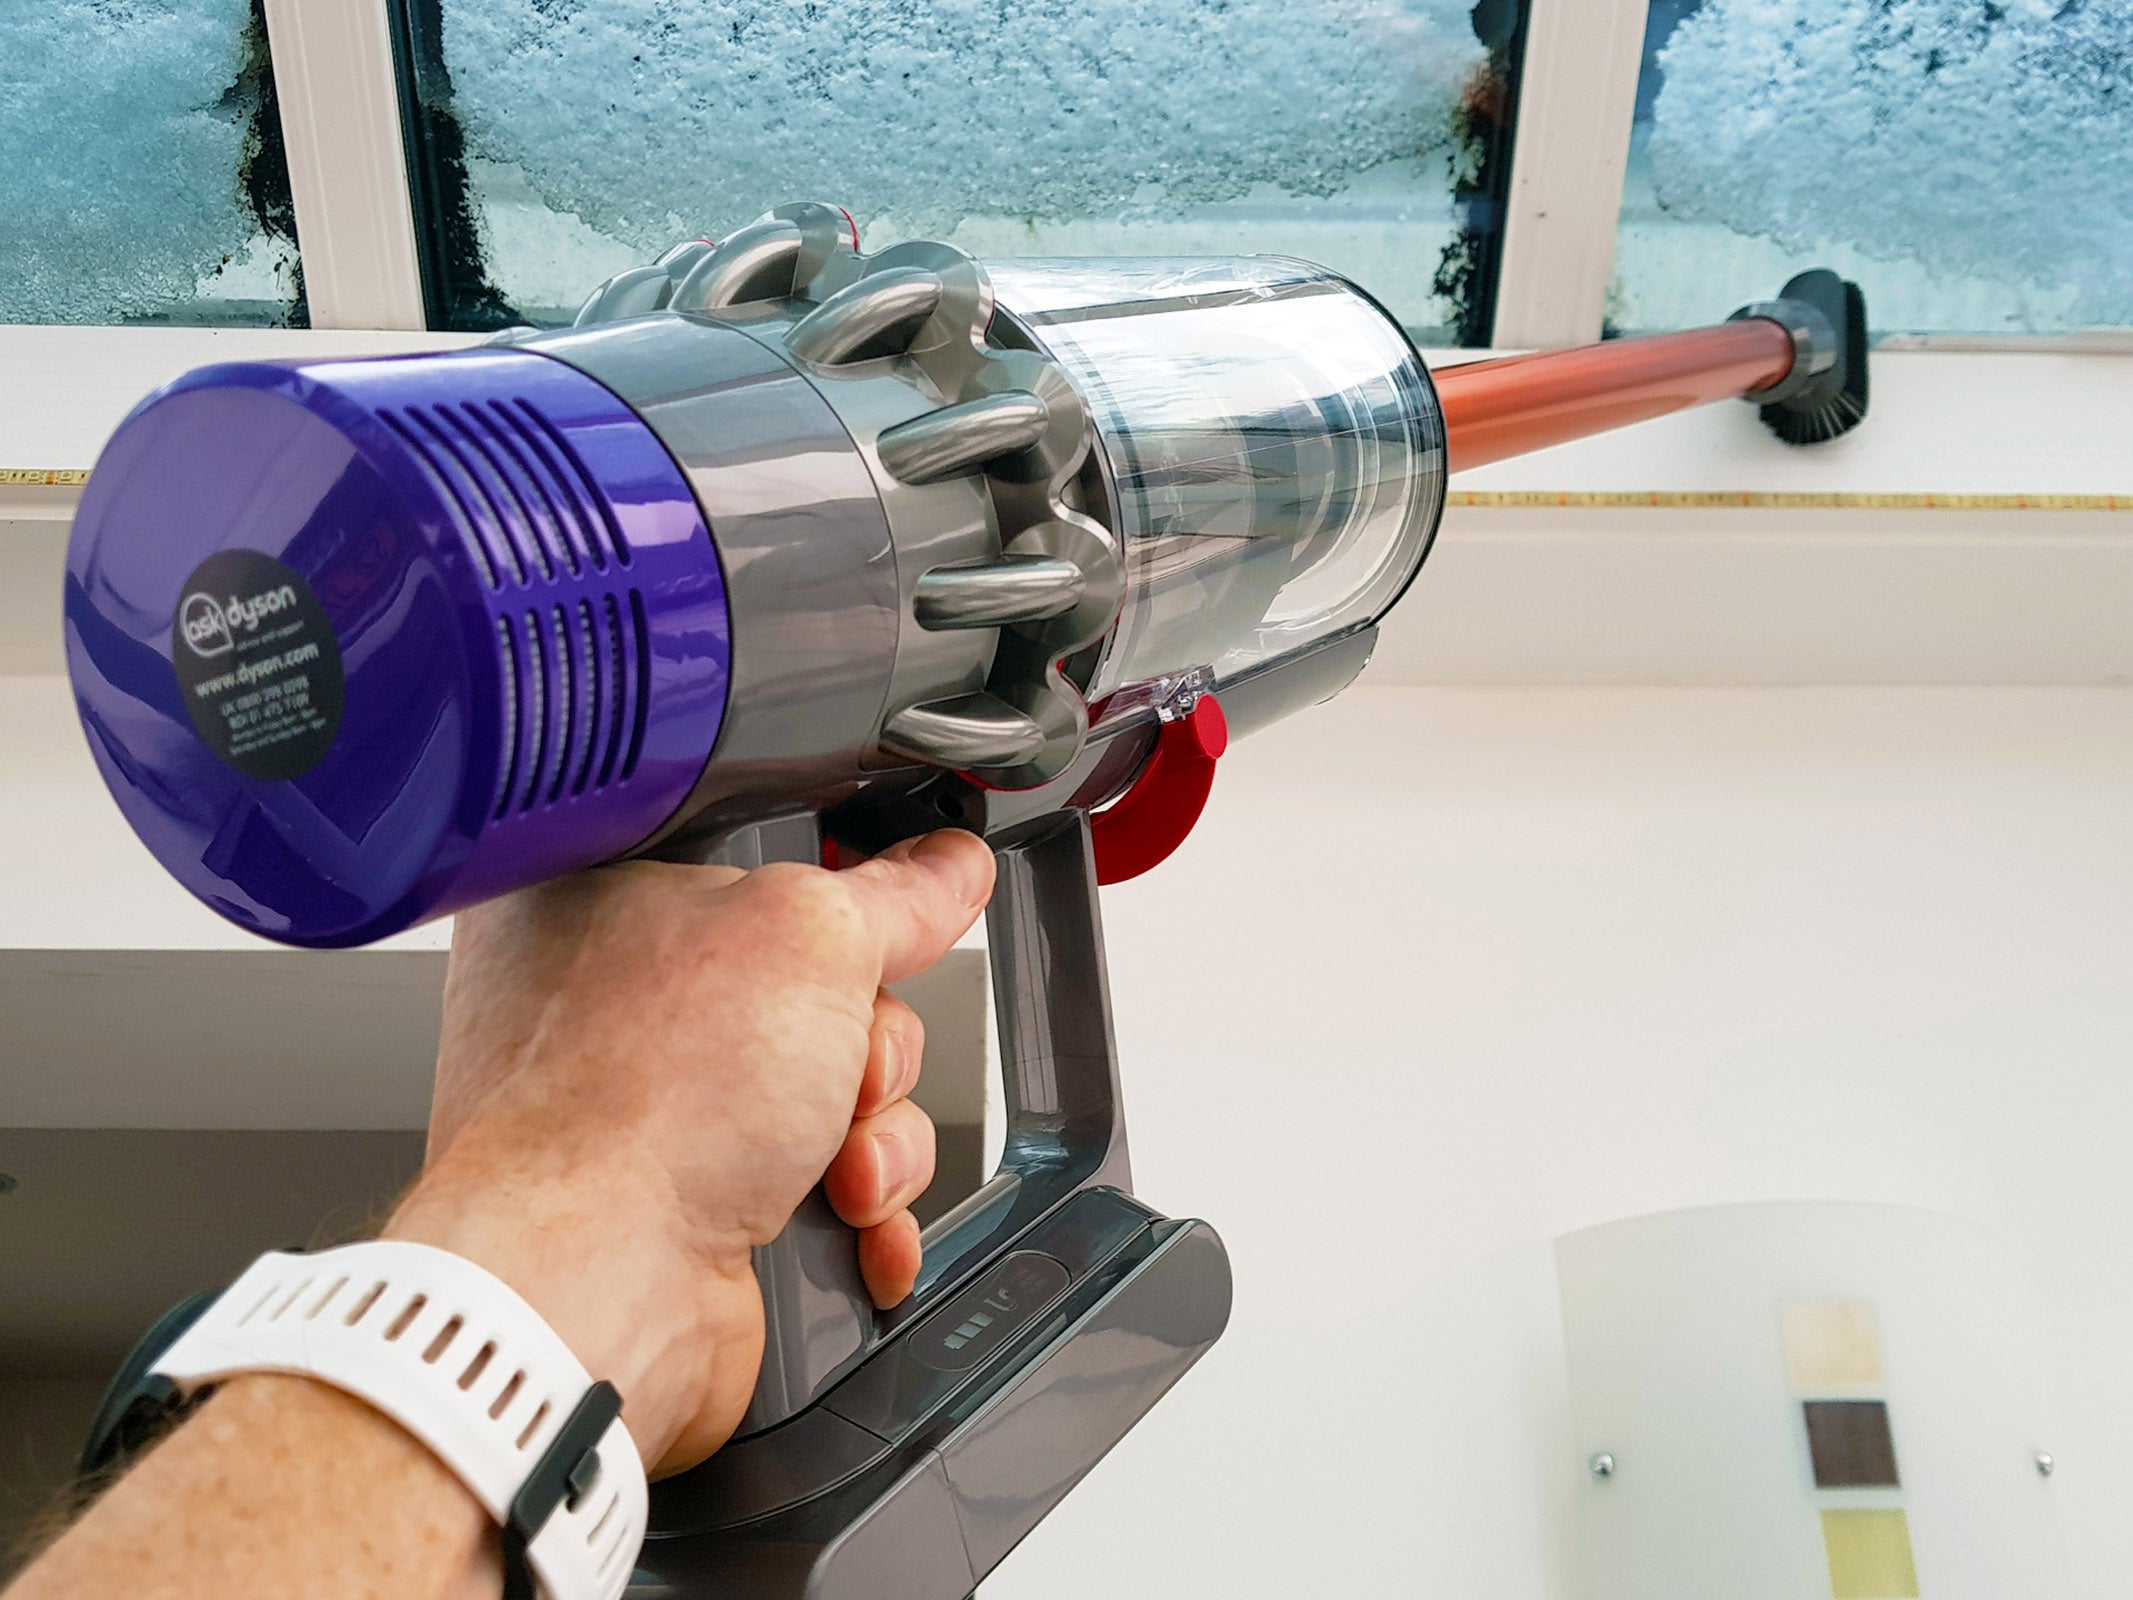 Dyson cyclone v10 absolute review: A powerful vacuum that's worth